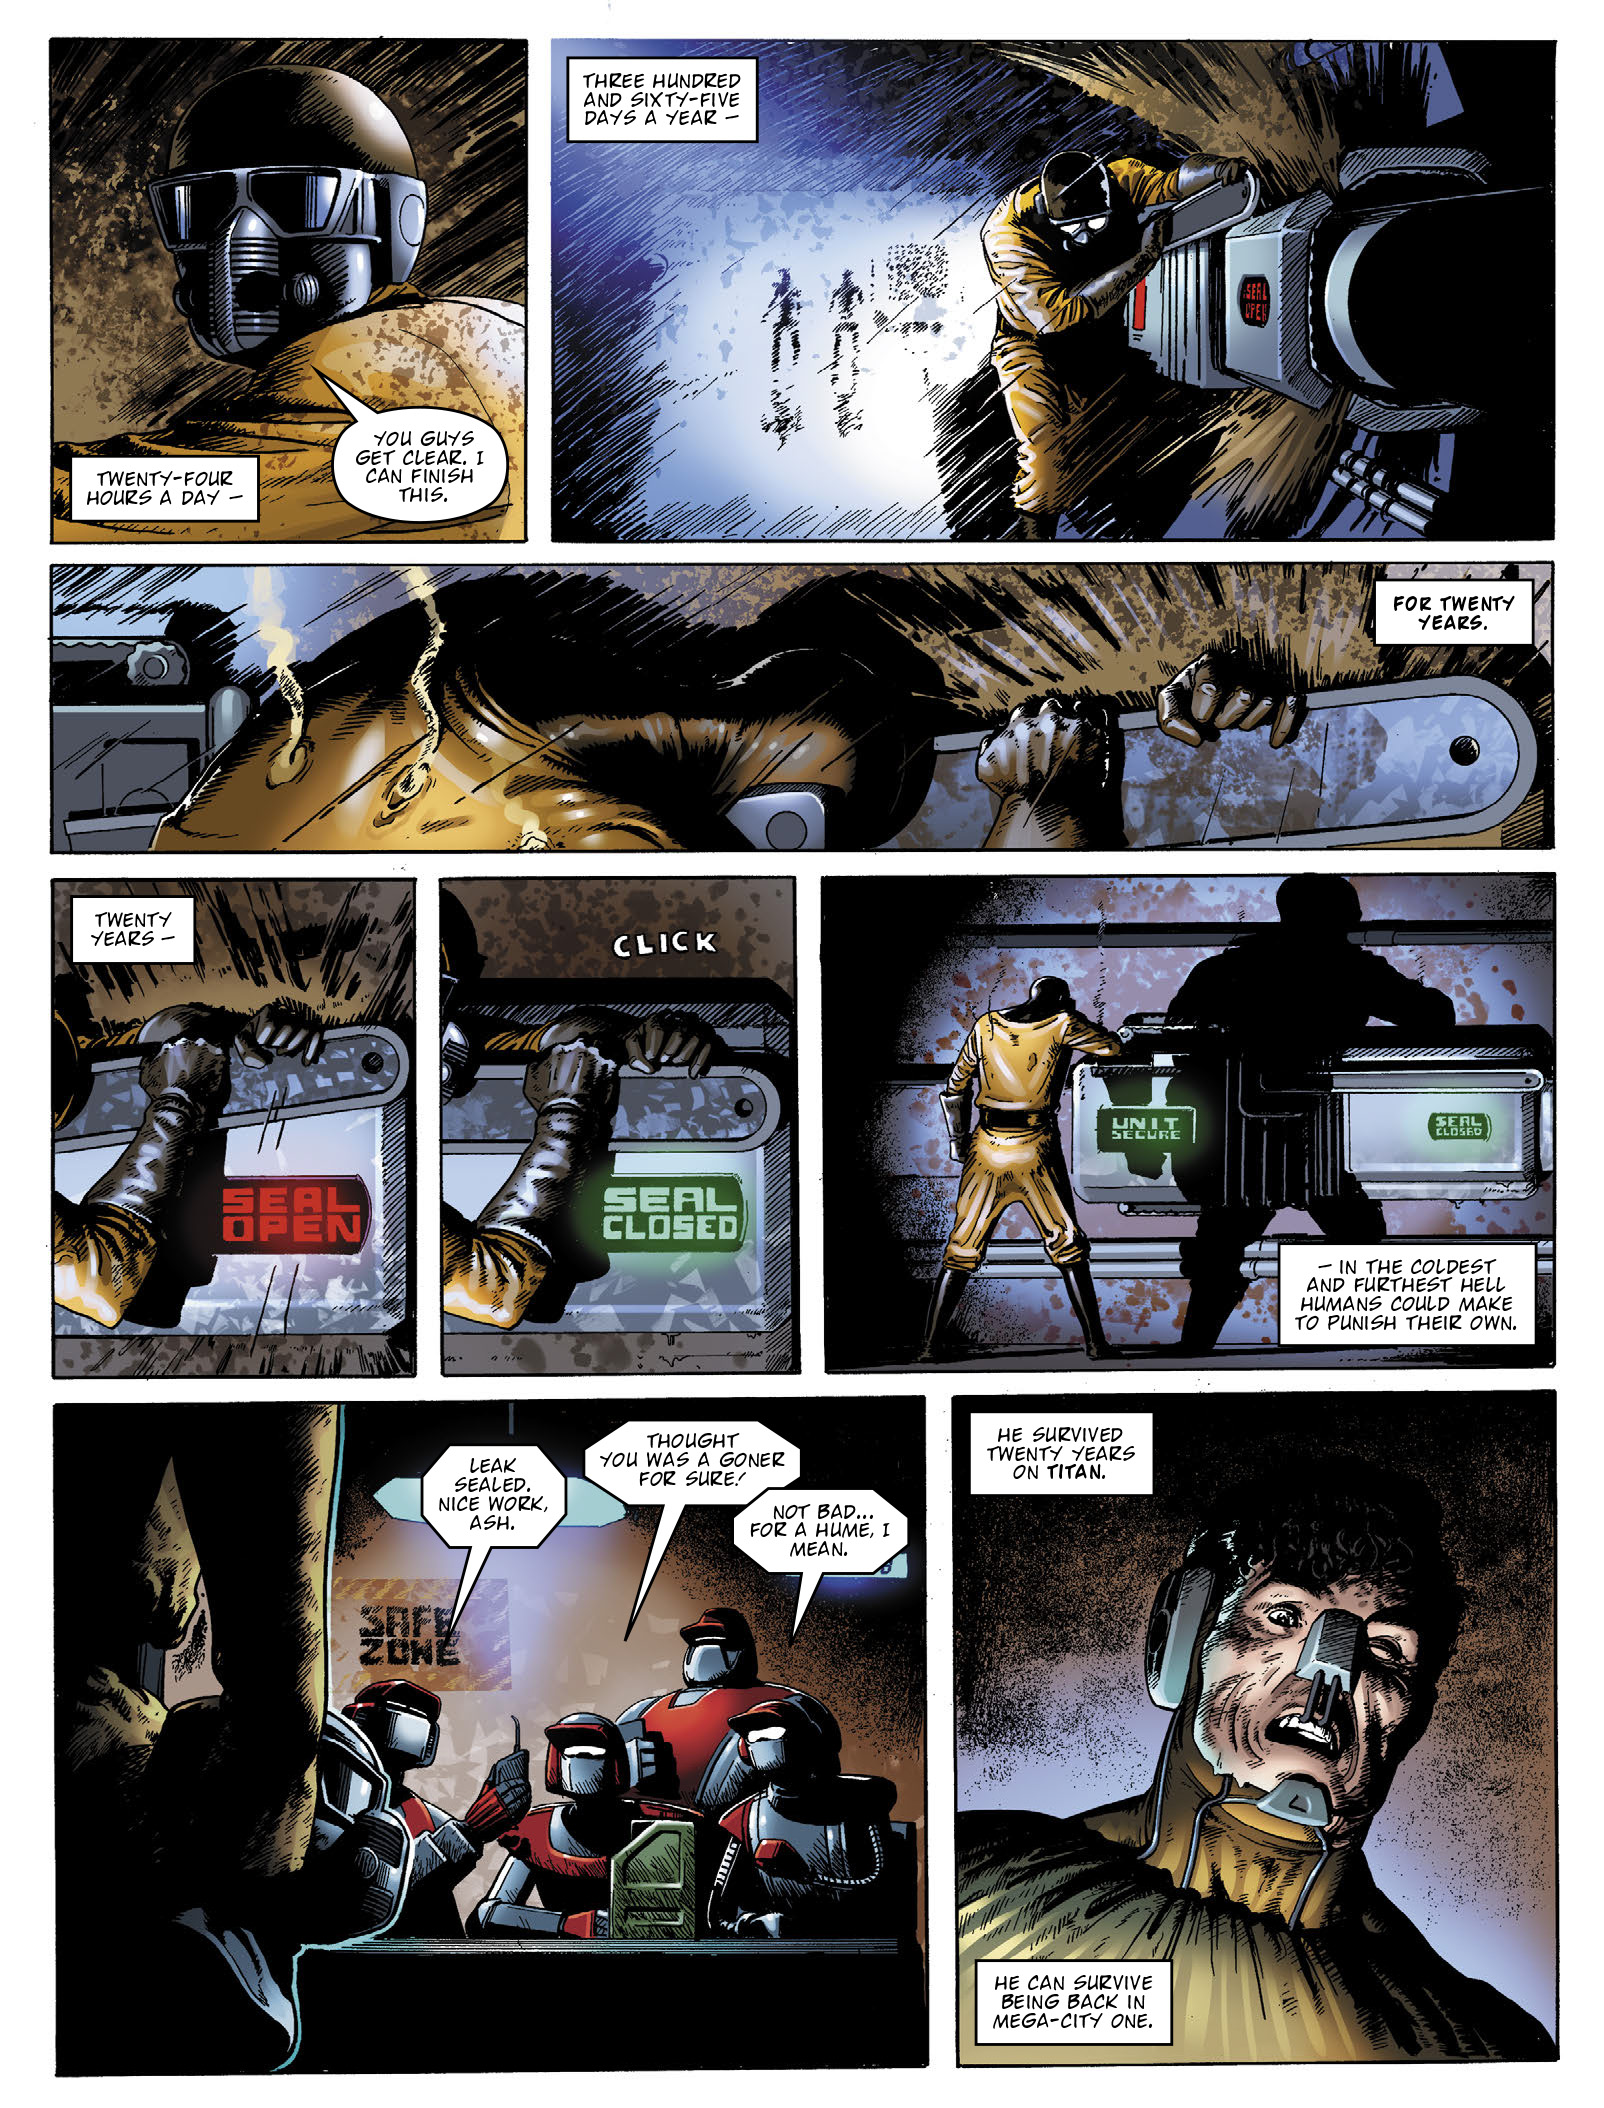 2000 AD: Chapter 2225 - Page 4